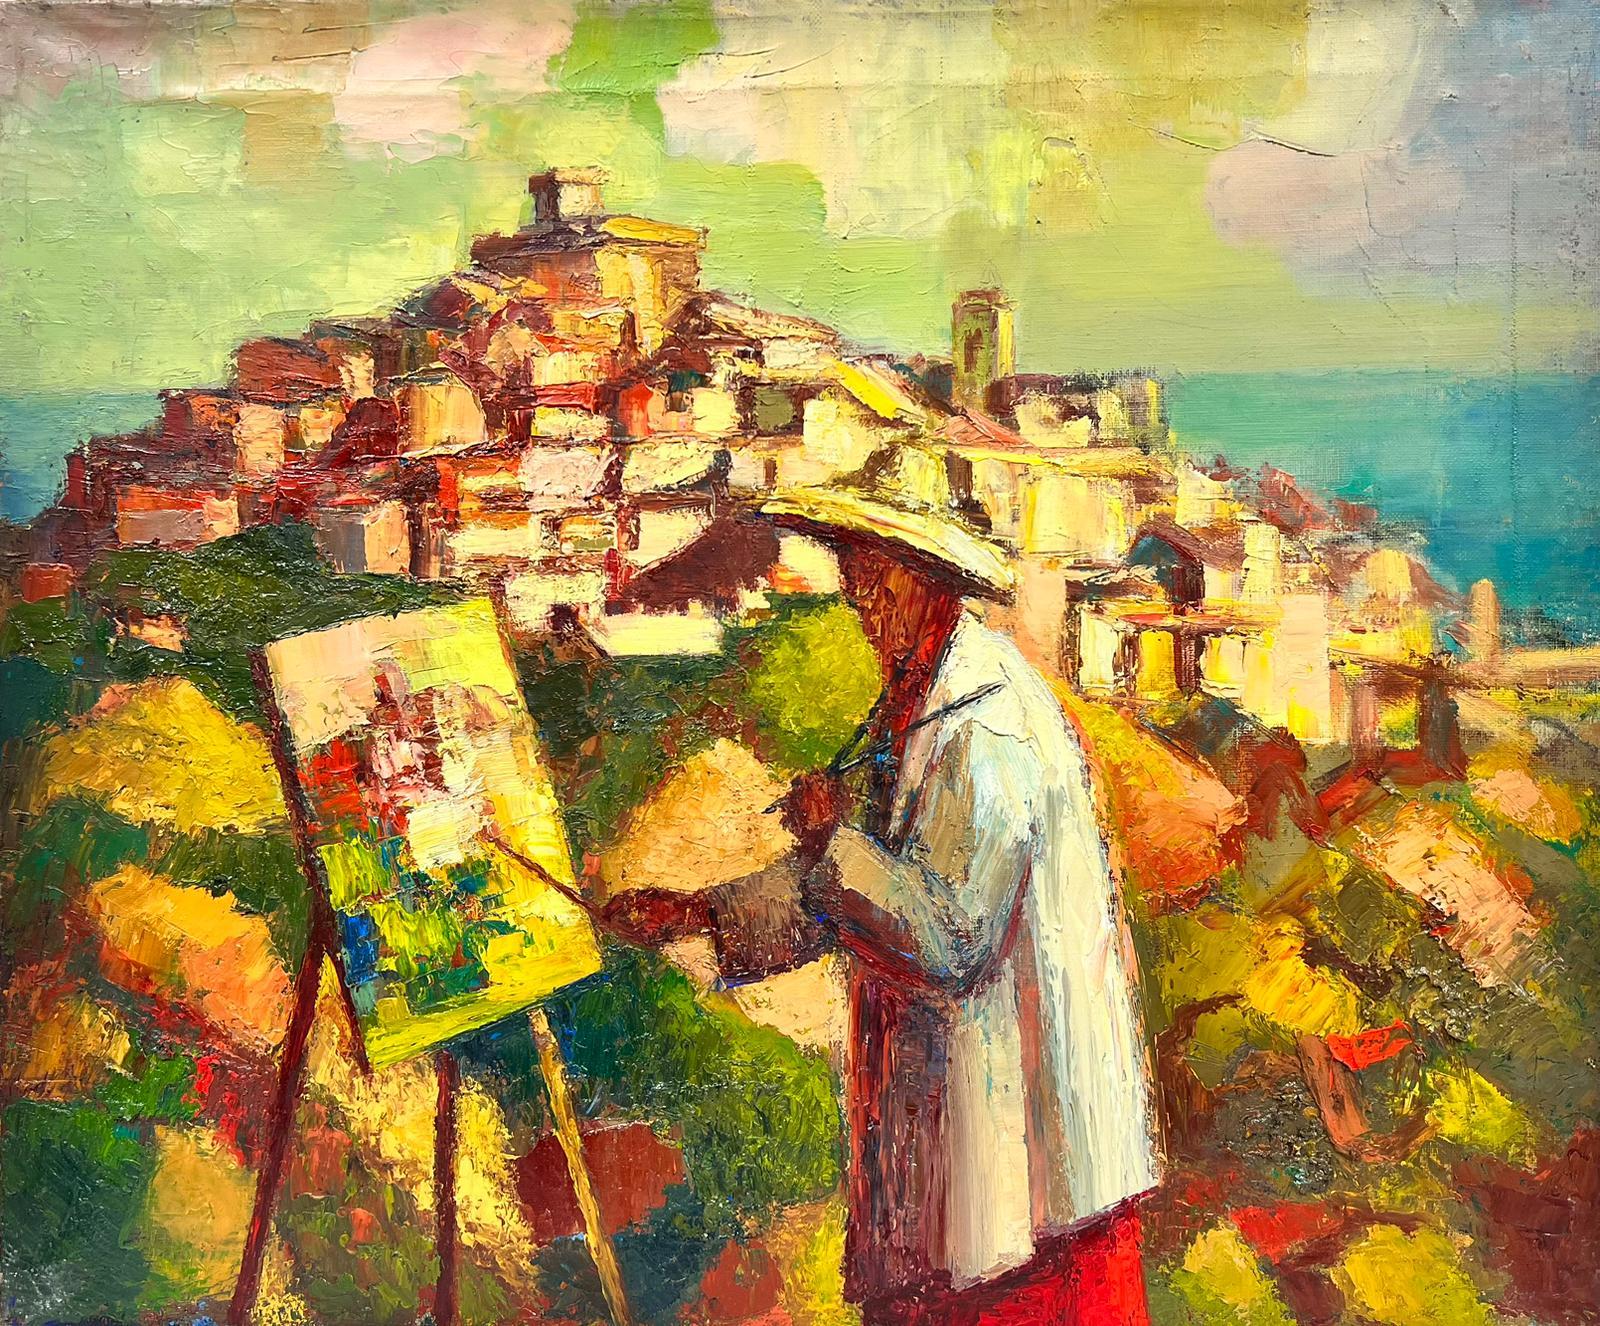 Josine Vignon Landscape Painting - 1950's French Post Impressionist Cubist Oil Artist Painting at Easel in Provence